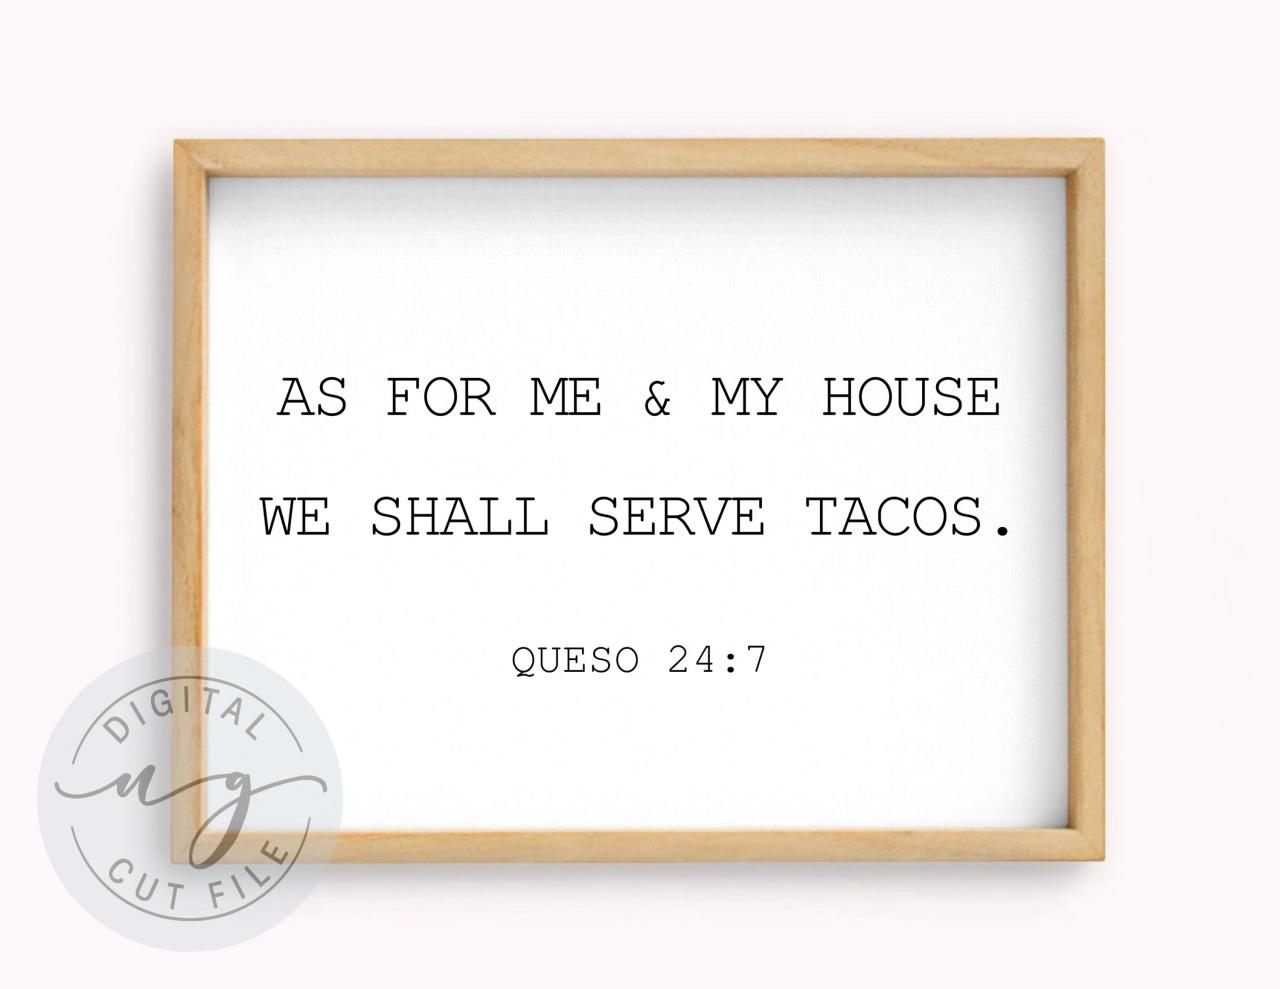 We Shall Serve Tacos Quote Sign | Taco Verse | Svg, Dxf Cut File | Pdf Print File | Cricut Cameo Silhouette | Png Clipart | Instant Download